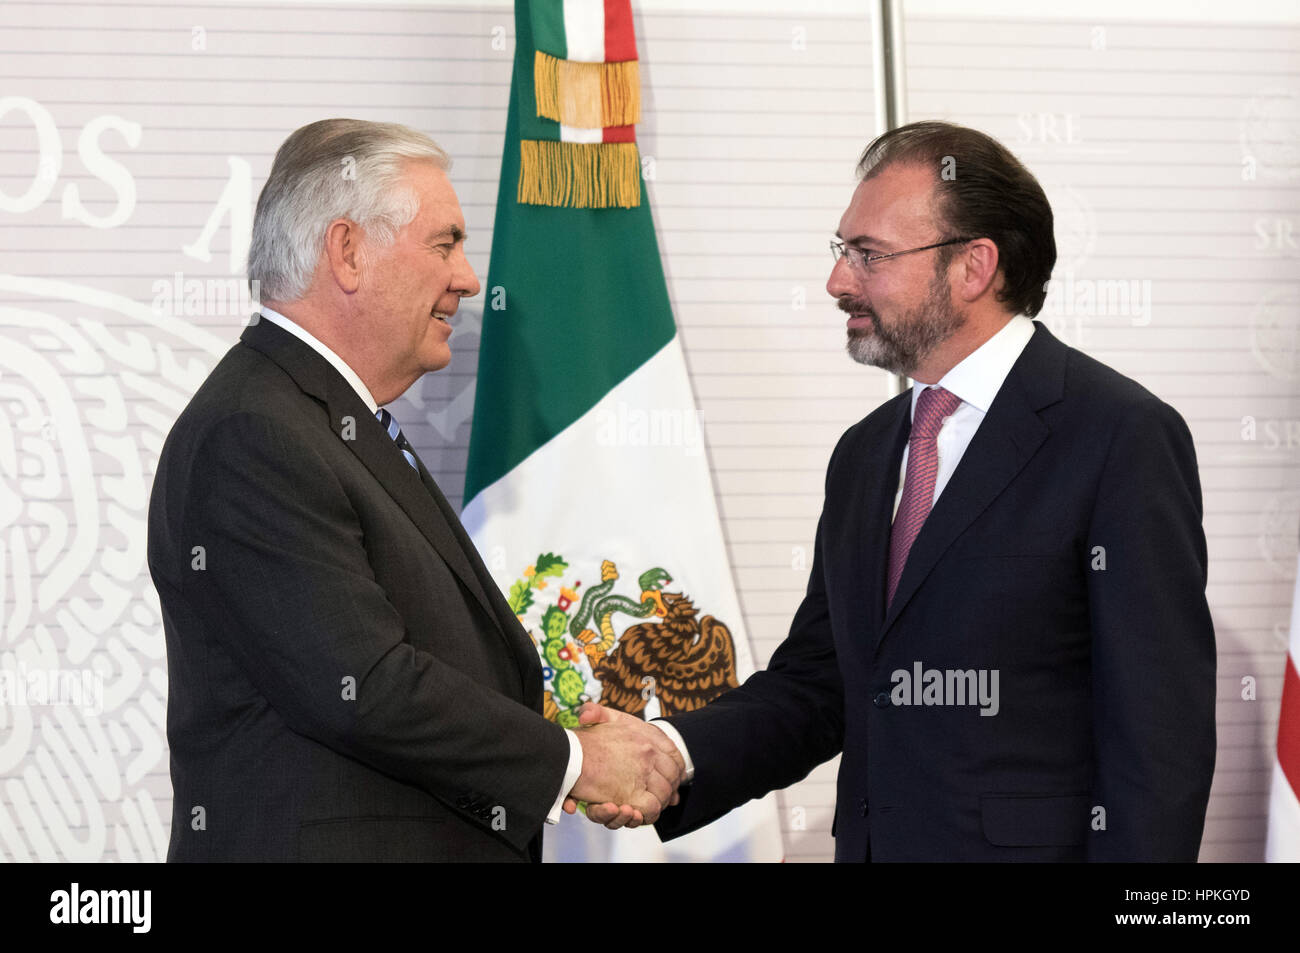 Mexico City, Mexico. 23rd Feb, 2017. Mexico's Foreign Affairs Minister Luis Videgaray(R) shakes hands with U.S. Secretary of State Rex Tillerson during a press conference in Mexico City, capital of Mexico, on Feb. 23, 2017. Top U.S. envoys on a working visit to Mexico on Thursday tried to allay fears that their government was preparing to massively deport undocumented migrants back across the border. Credit: Francisco Canedo/Xinhua/Alamy Live News Stock Photo